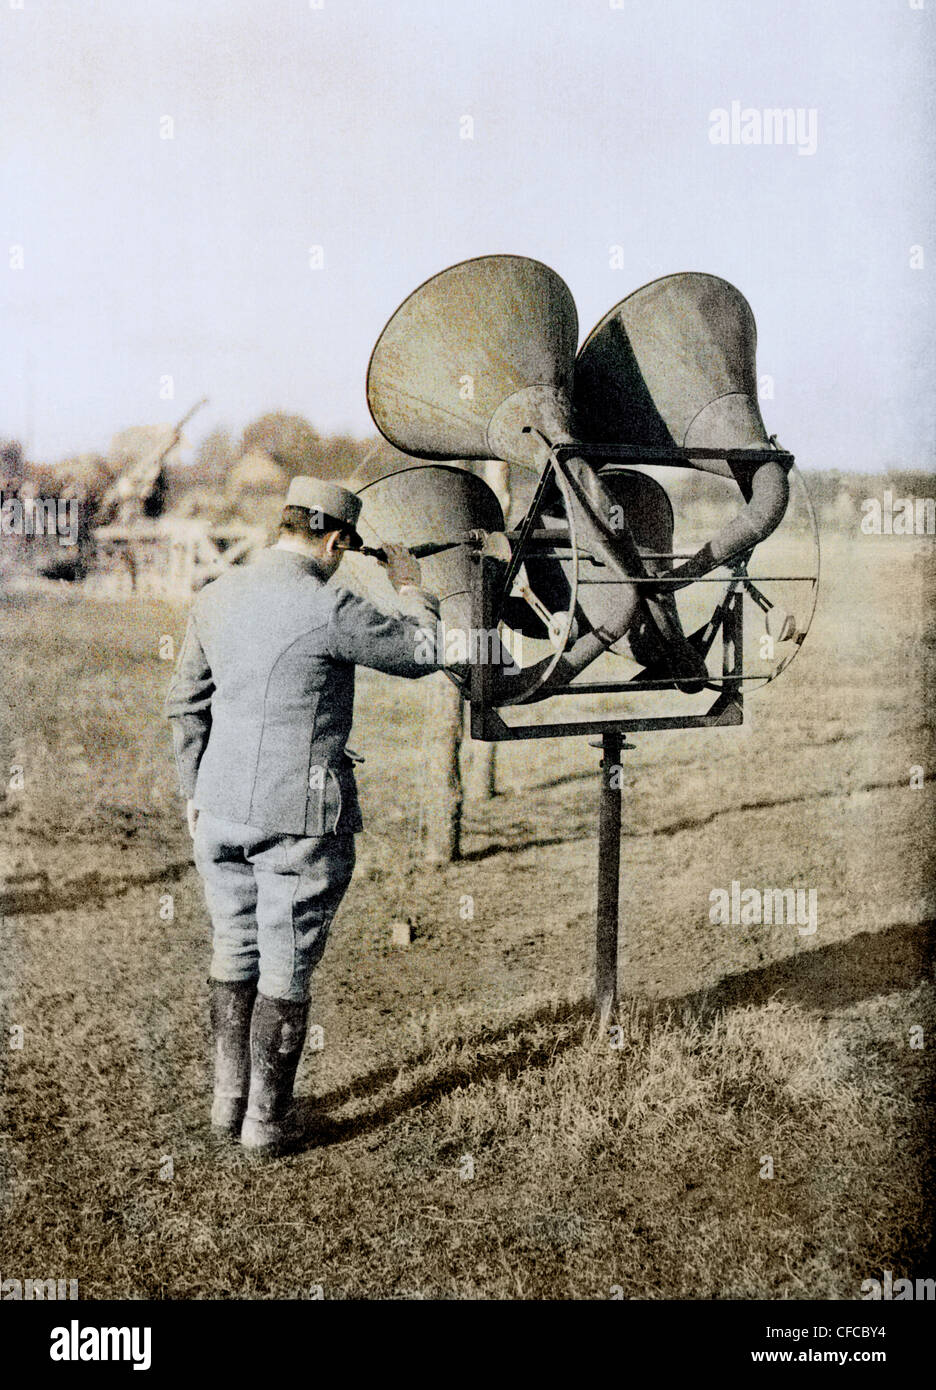 French, soldier, army, military, acoustic, listening, device, air planes, noise, anti-aircraft, Western Front, World War I, War, Stock Photo